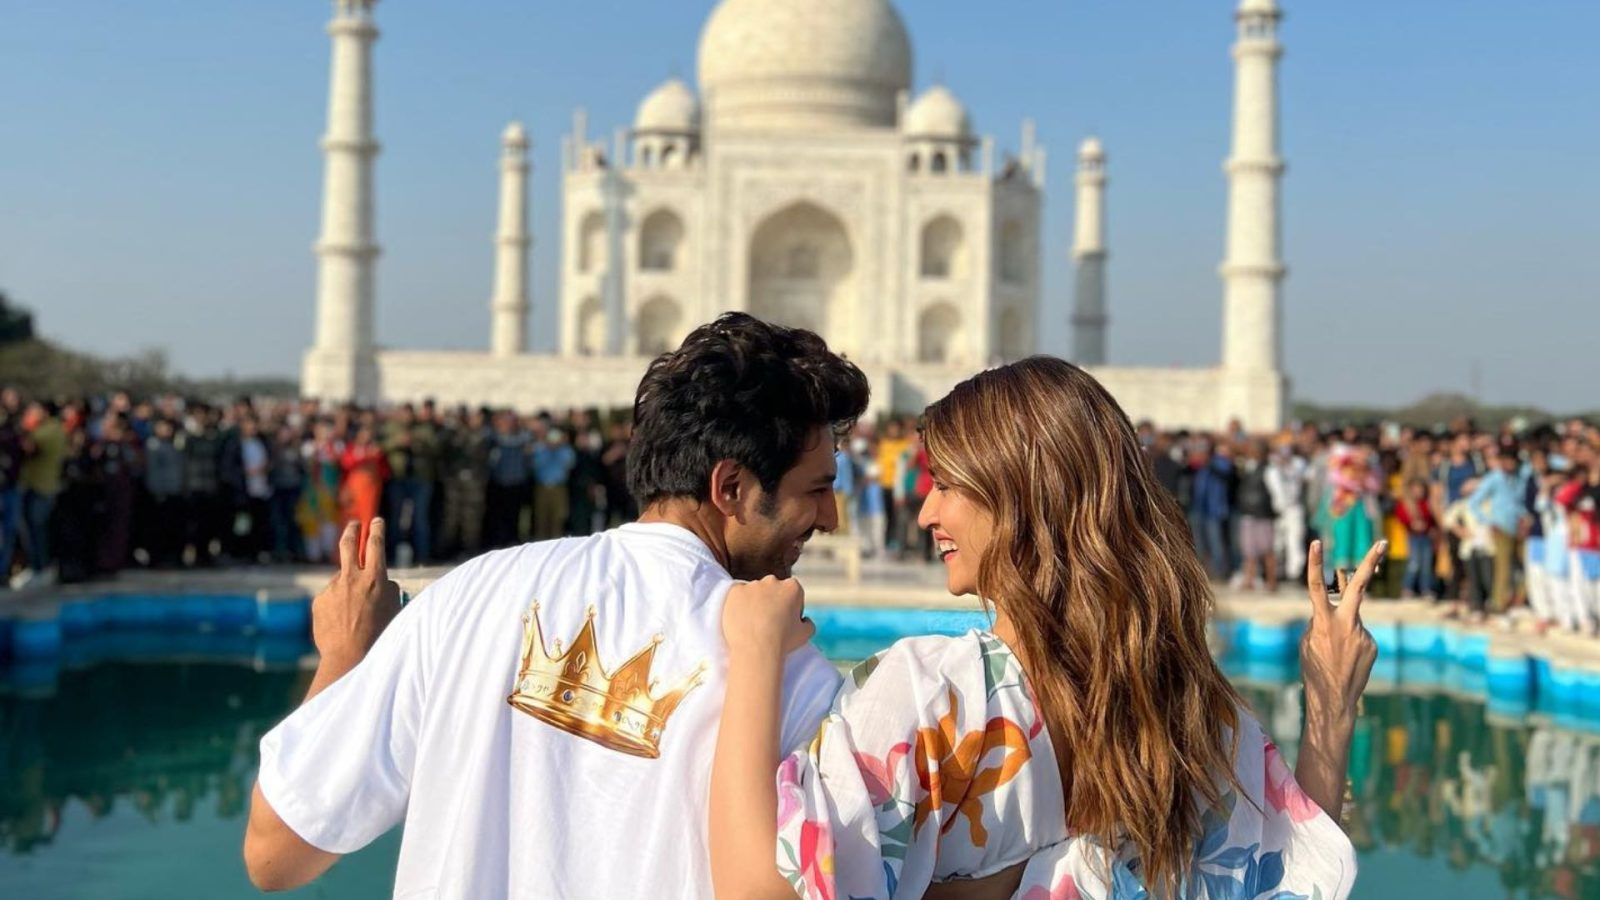 Kartik Aaryan Launches Shehzada Title Track At India Gate, Shakes A Leg  With Fans; Netizens React - News18